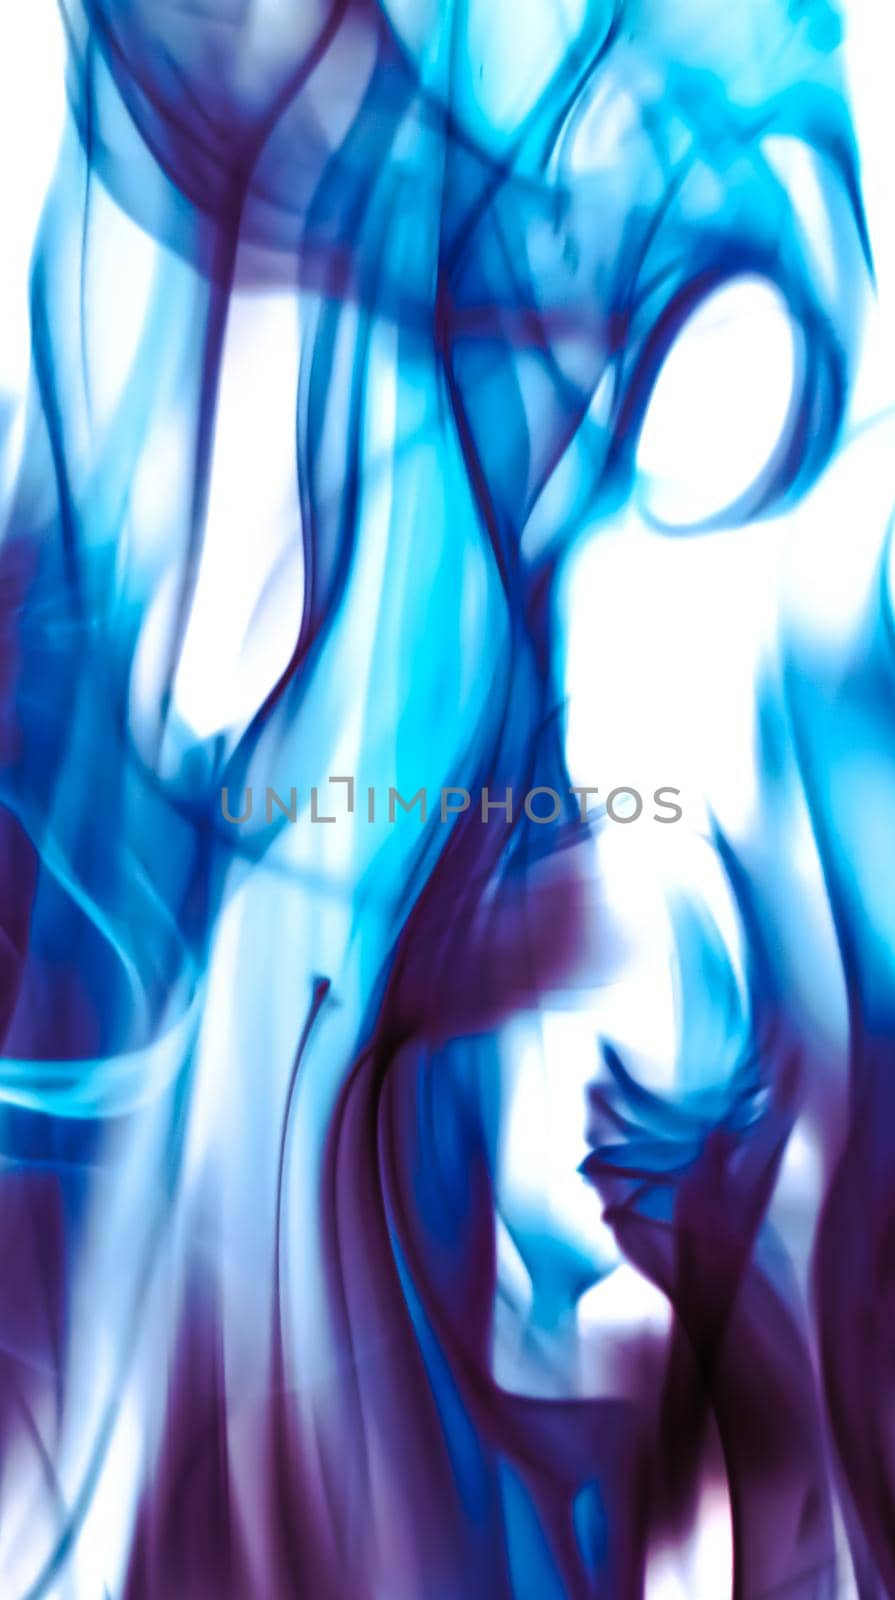 Abstract wave background, blue element for design by Anneleven